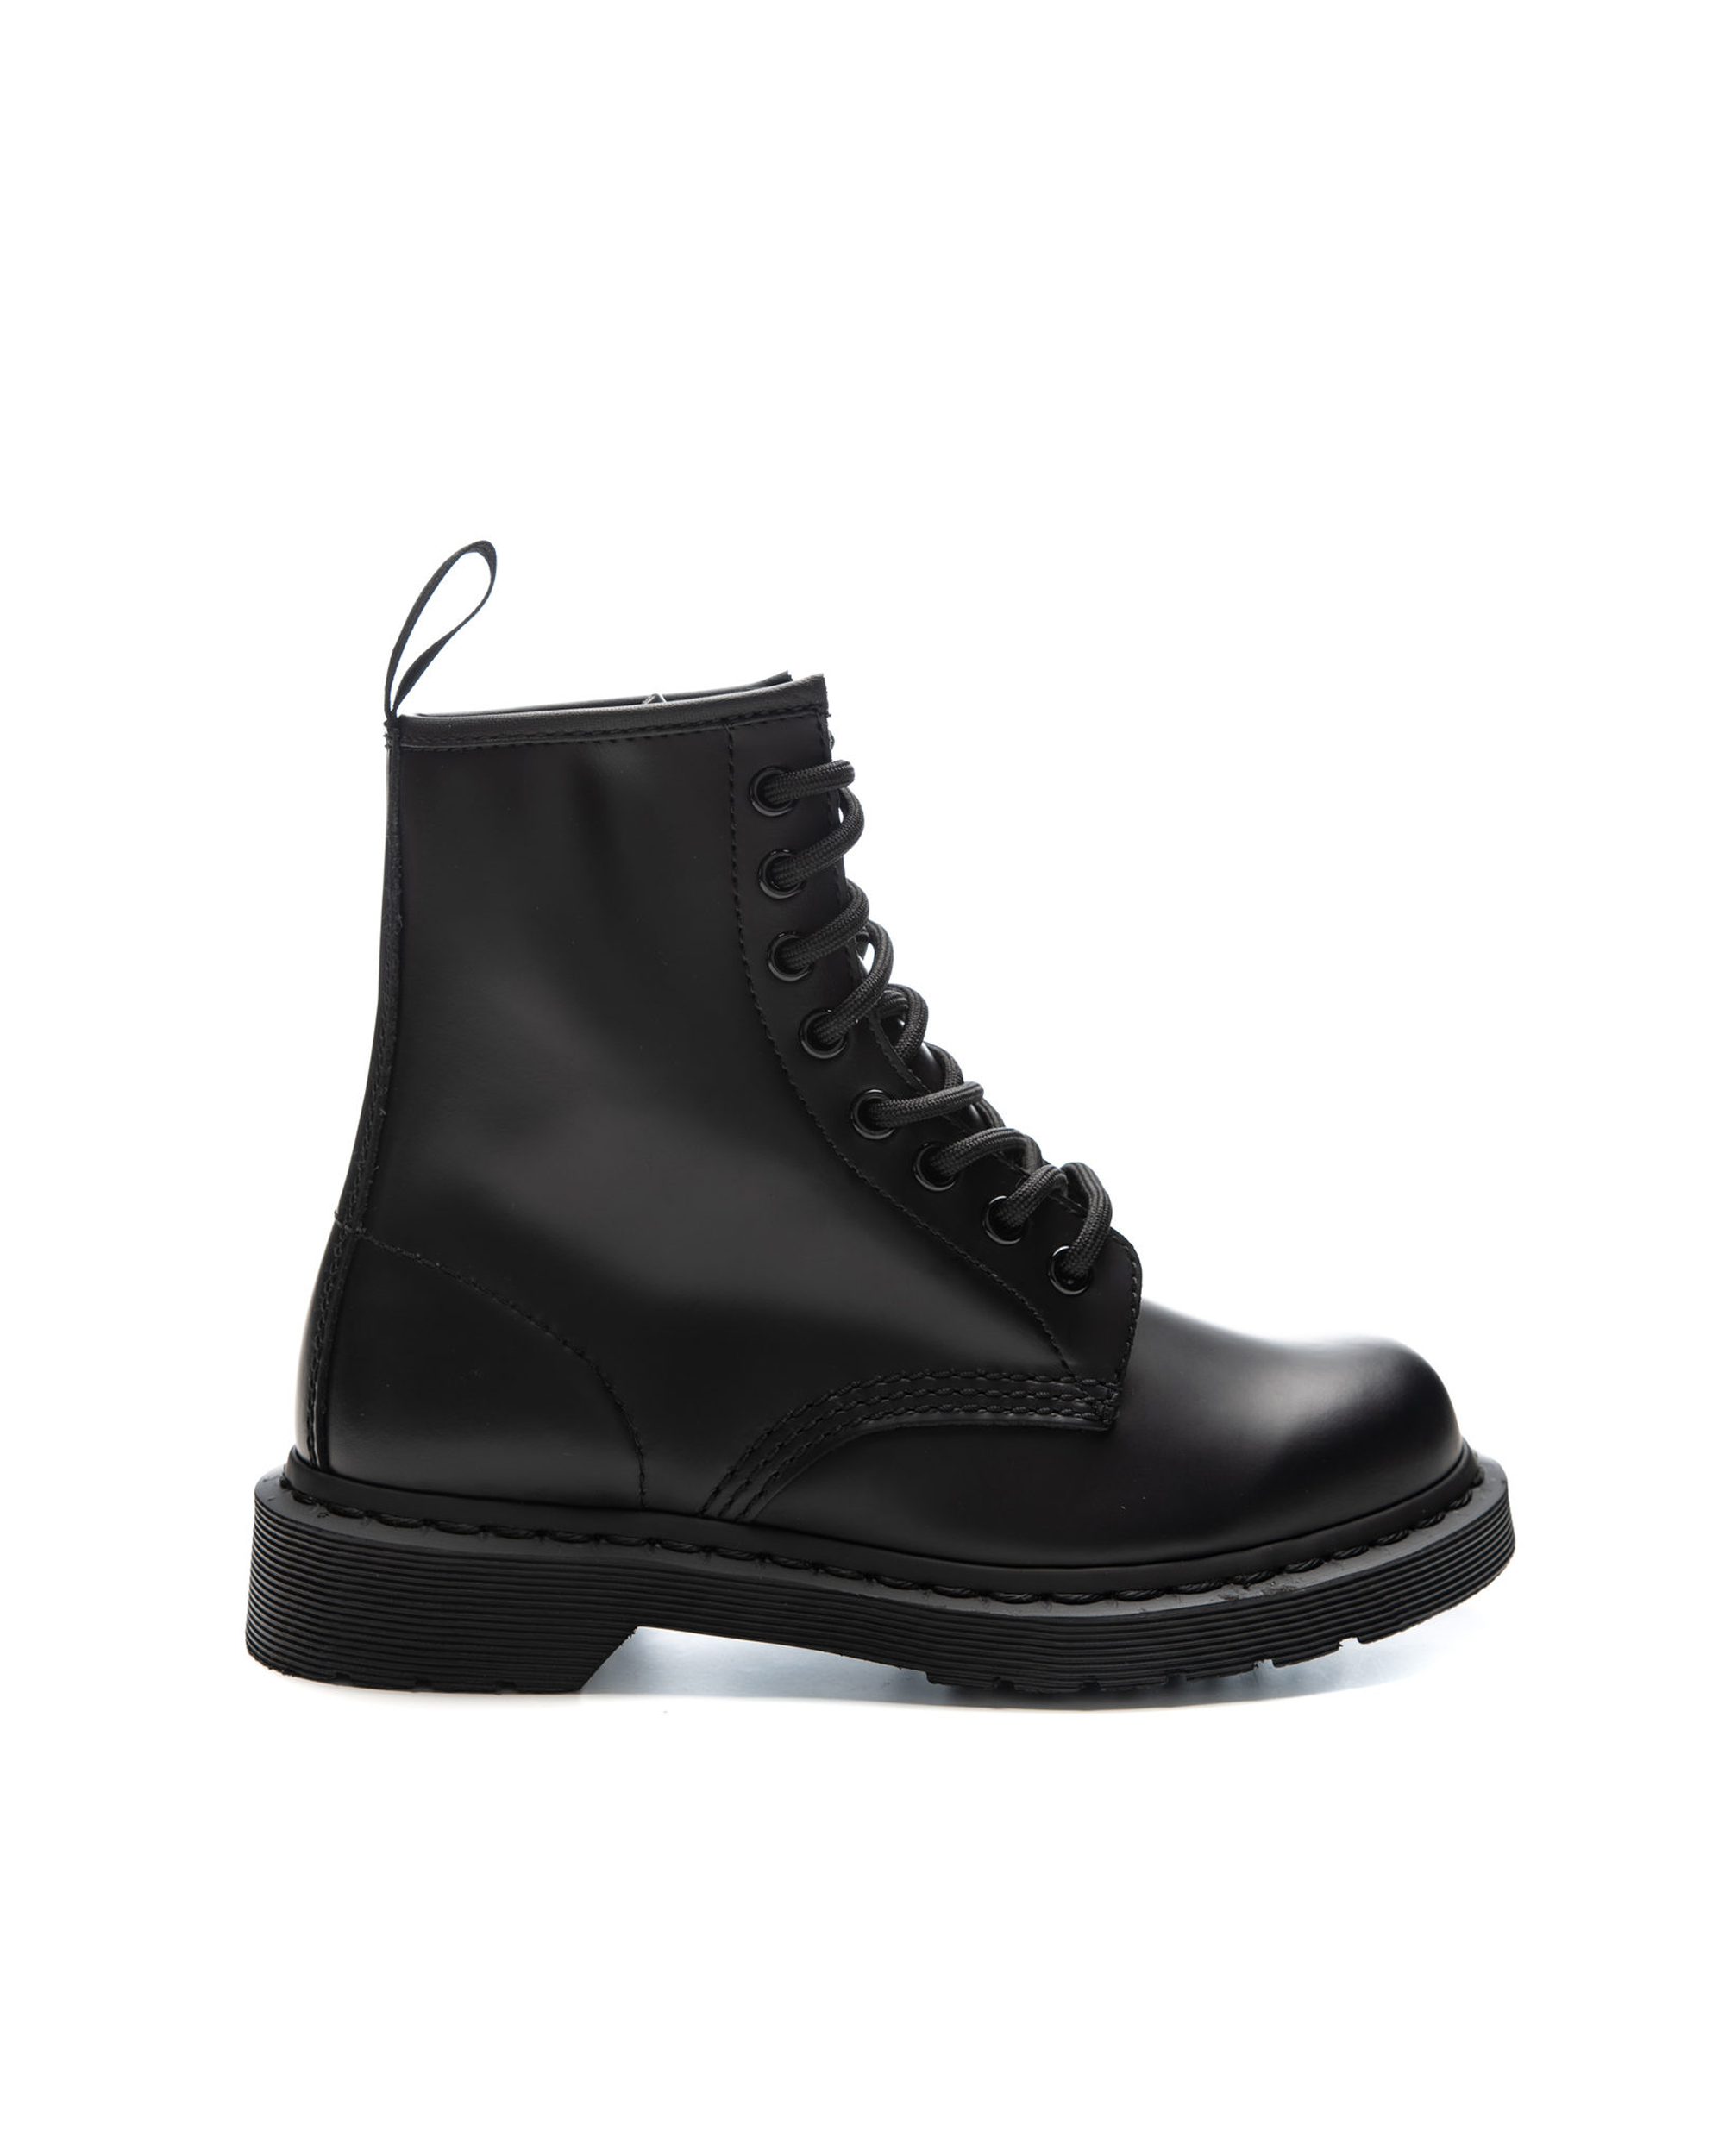 Dr. Martens' 1460 Mono Smooth Amphibian In Black Smooth